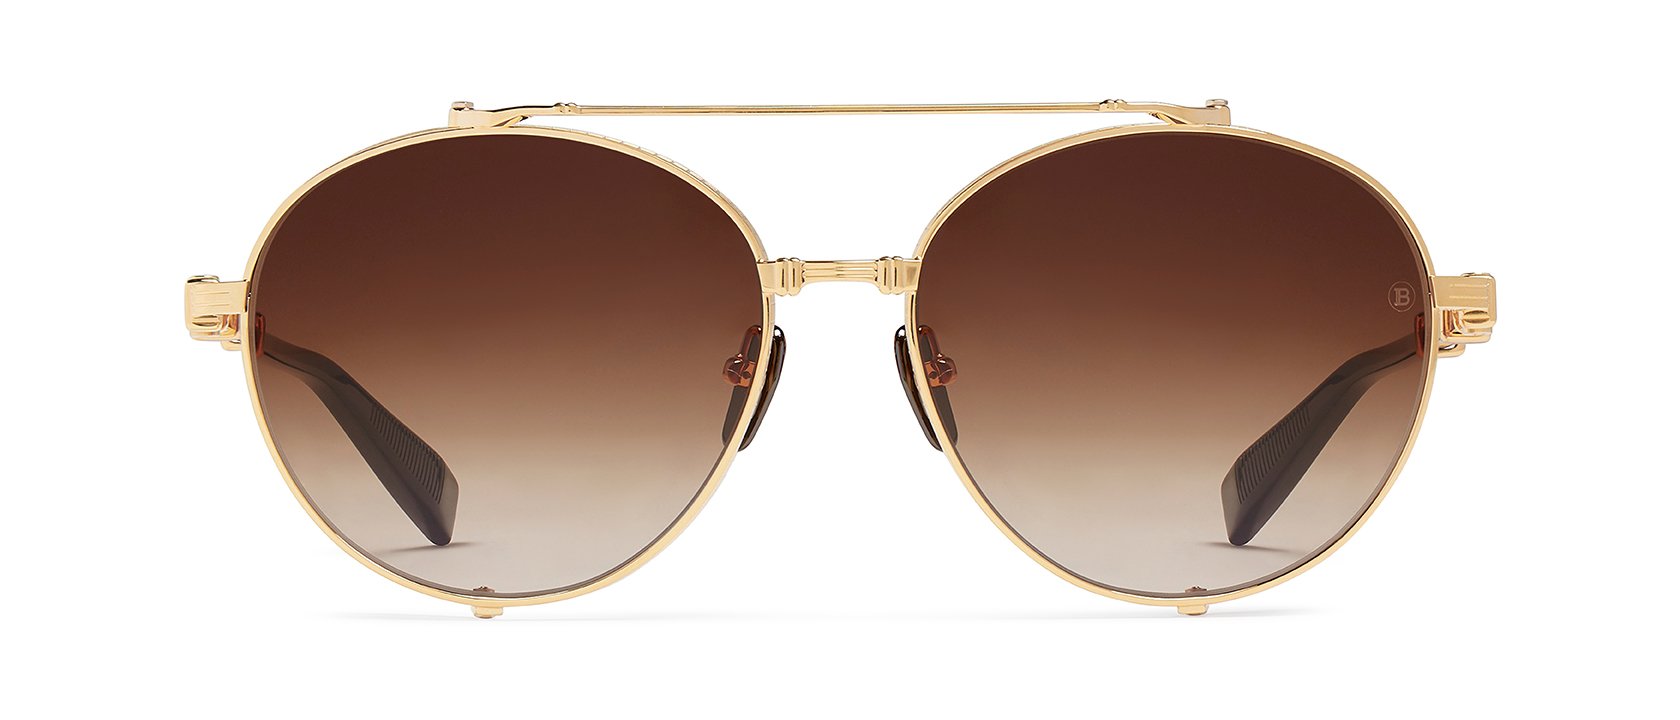 Balmain Imperial 53mm Square Sunglasses - Gold Red One-Size